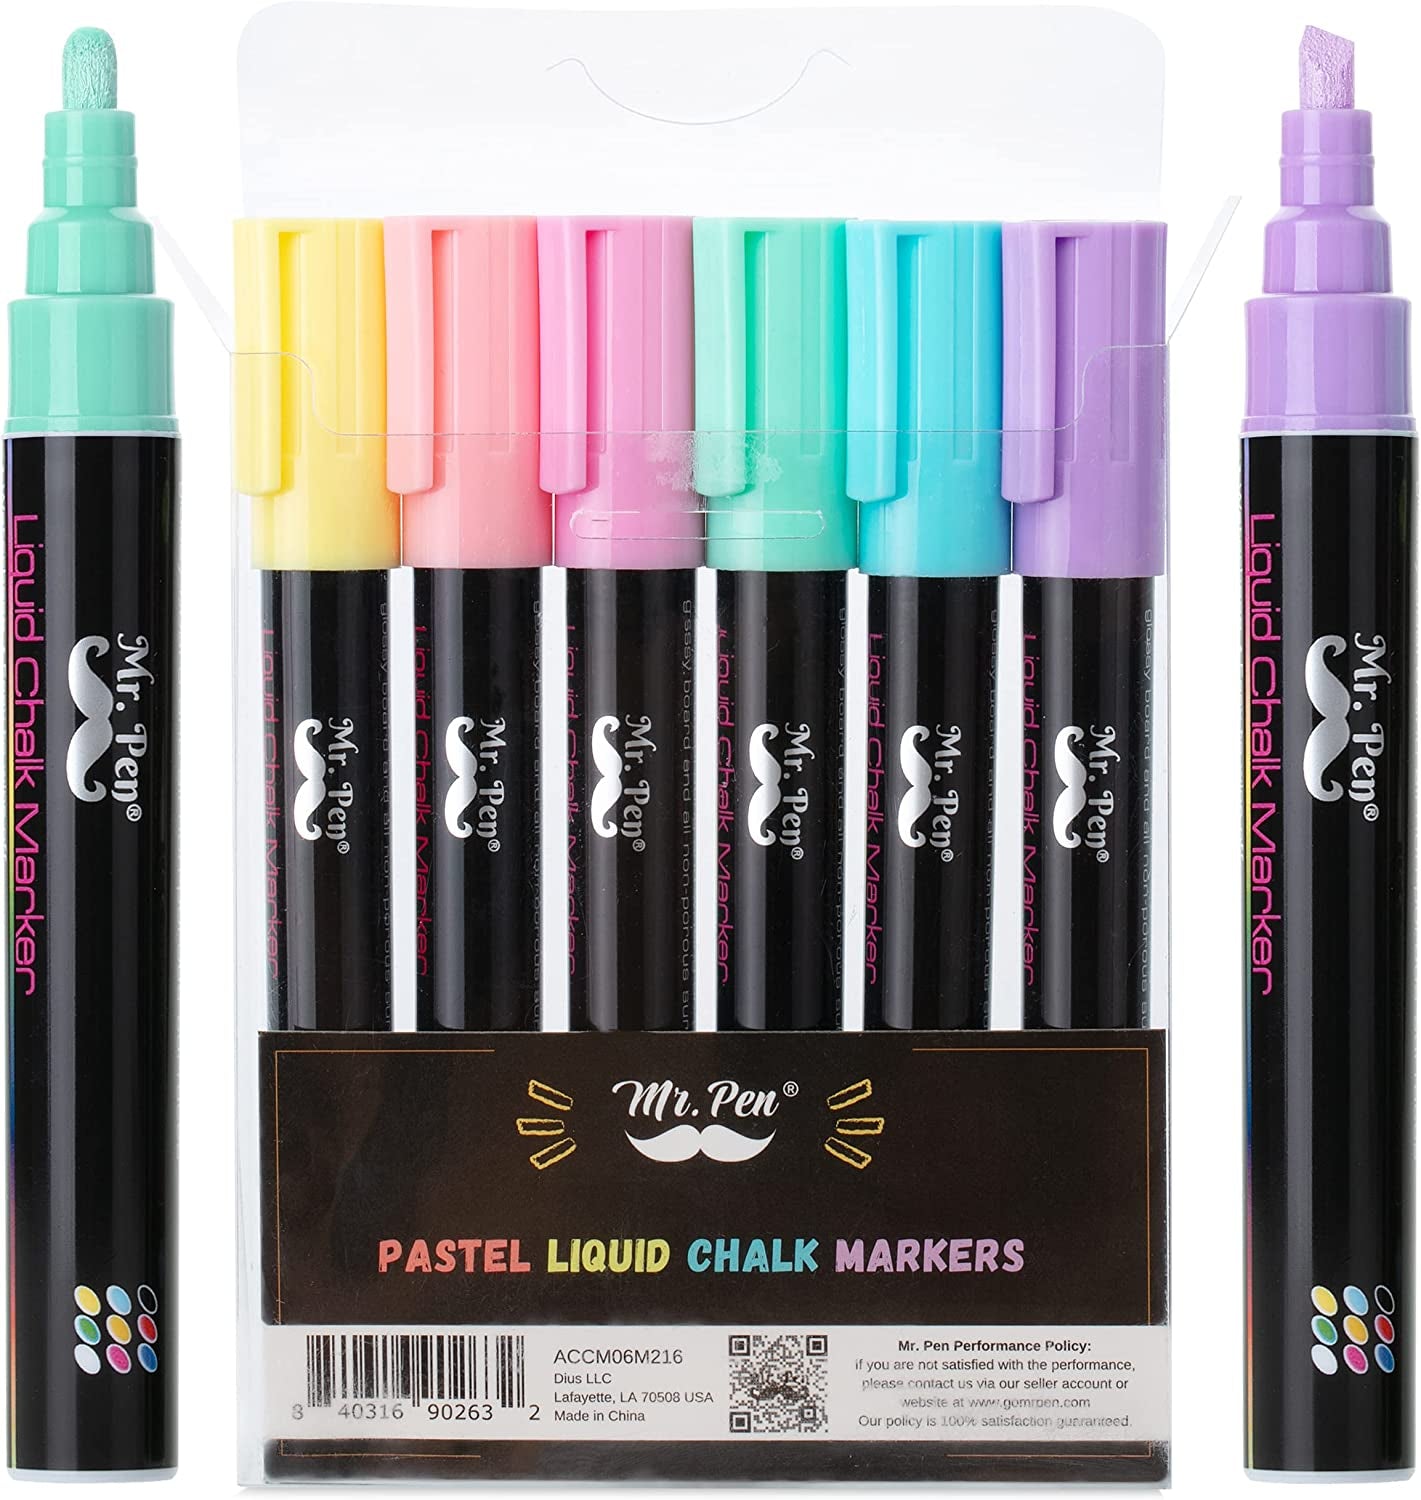  Chalk Markers, 6 Pack, Dual Tip, Pastel Colors, 8 Labels, Chalkboard  Markers, Liquid Chalk Markers, Chalk Markers for Chalkboard, Chalk Pens,  Chalk